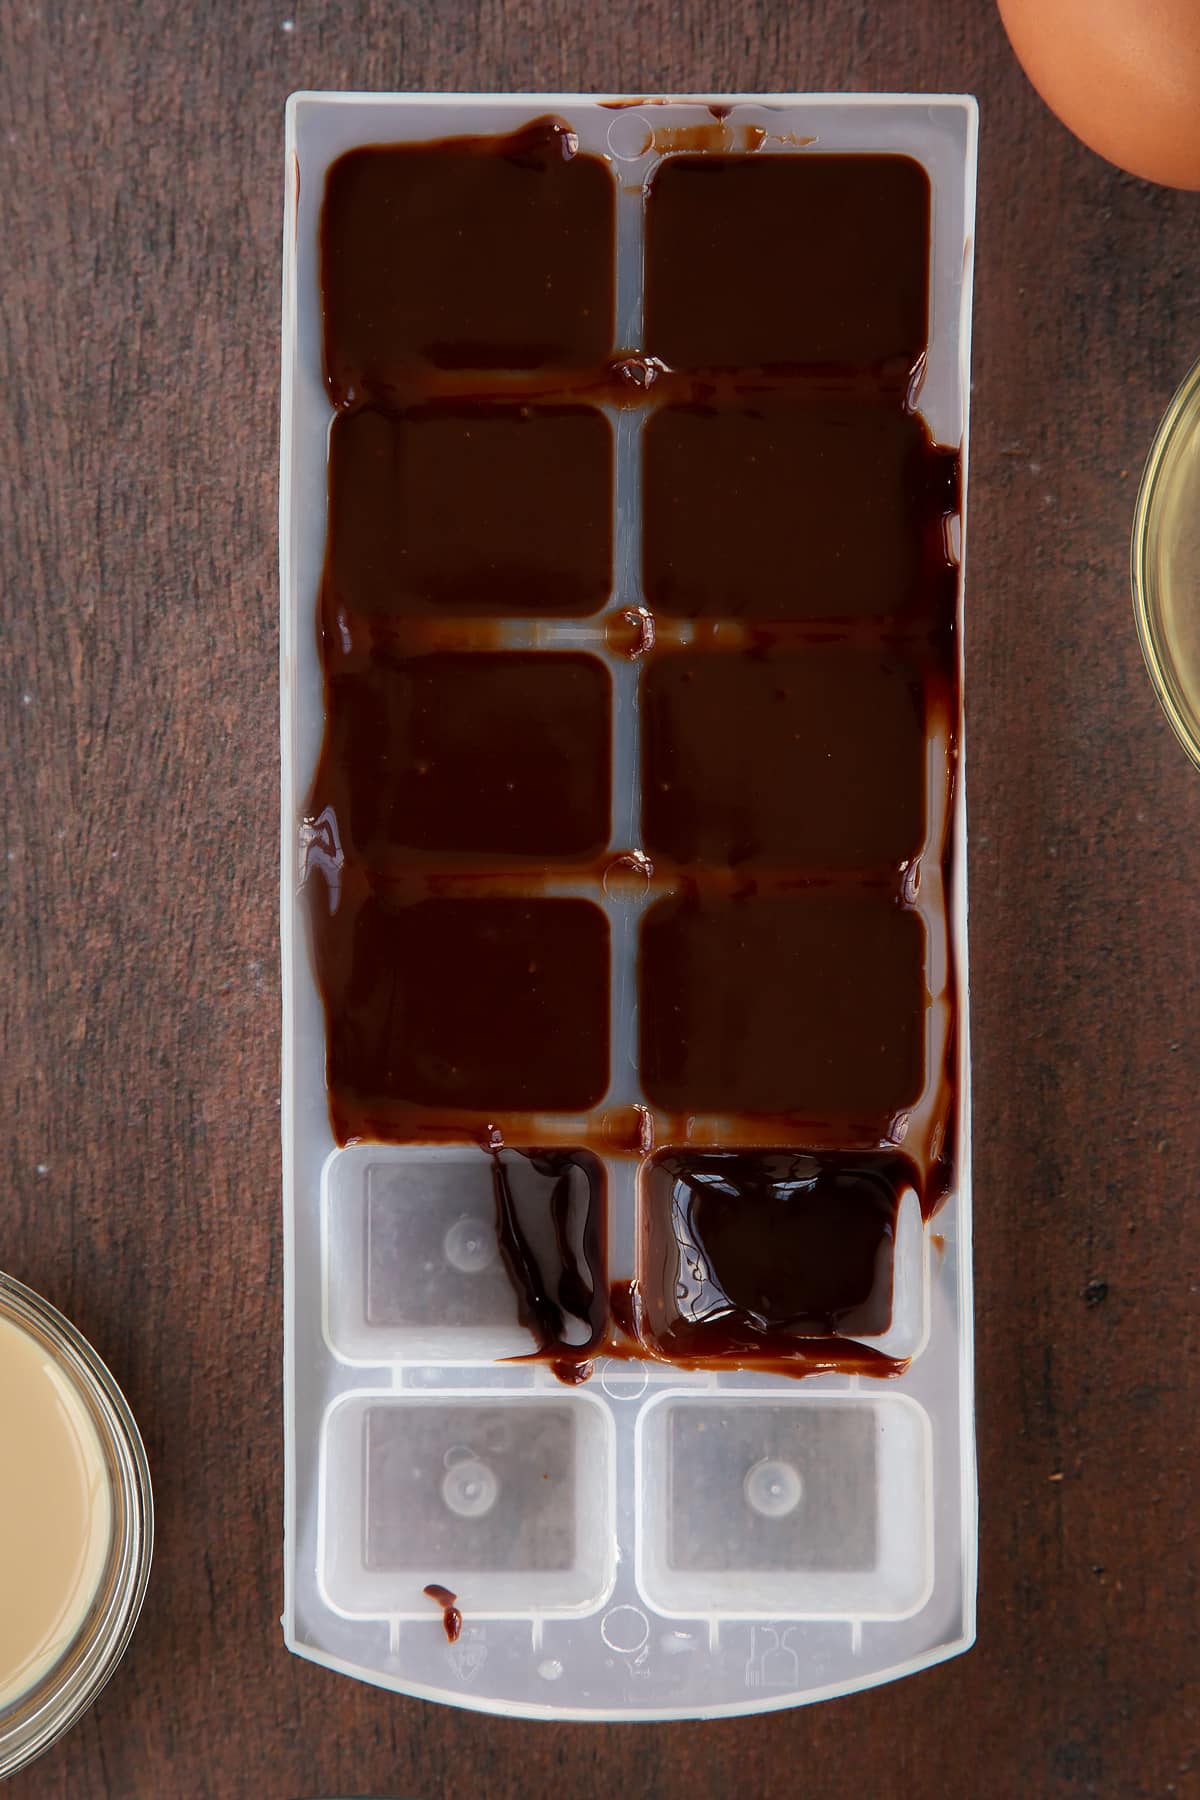 melted chocolate, cream and Baileys in an ice cube tray.